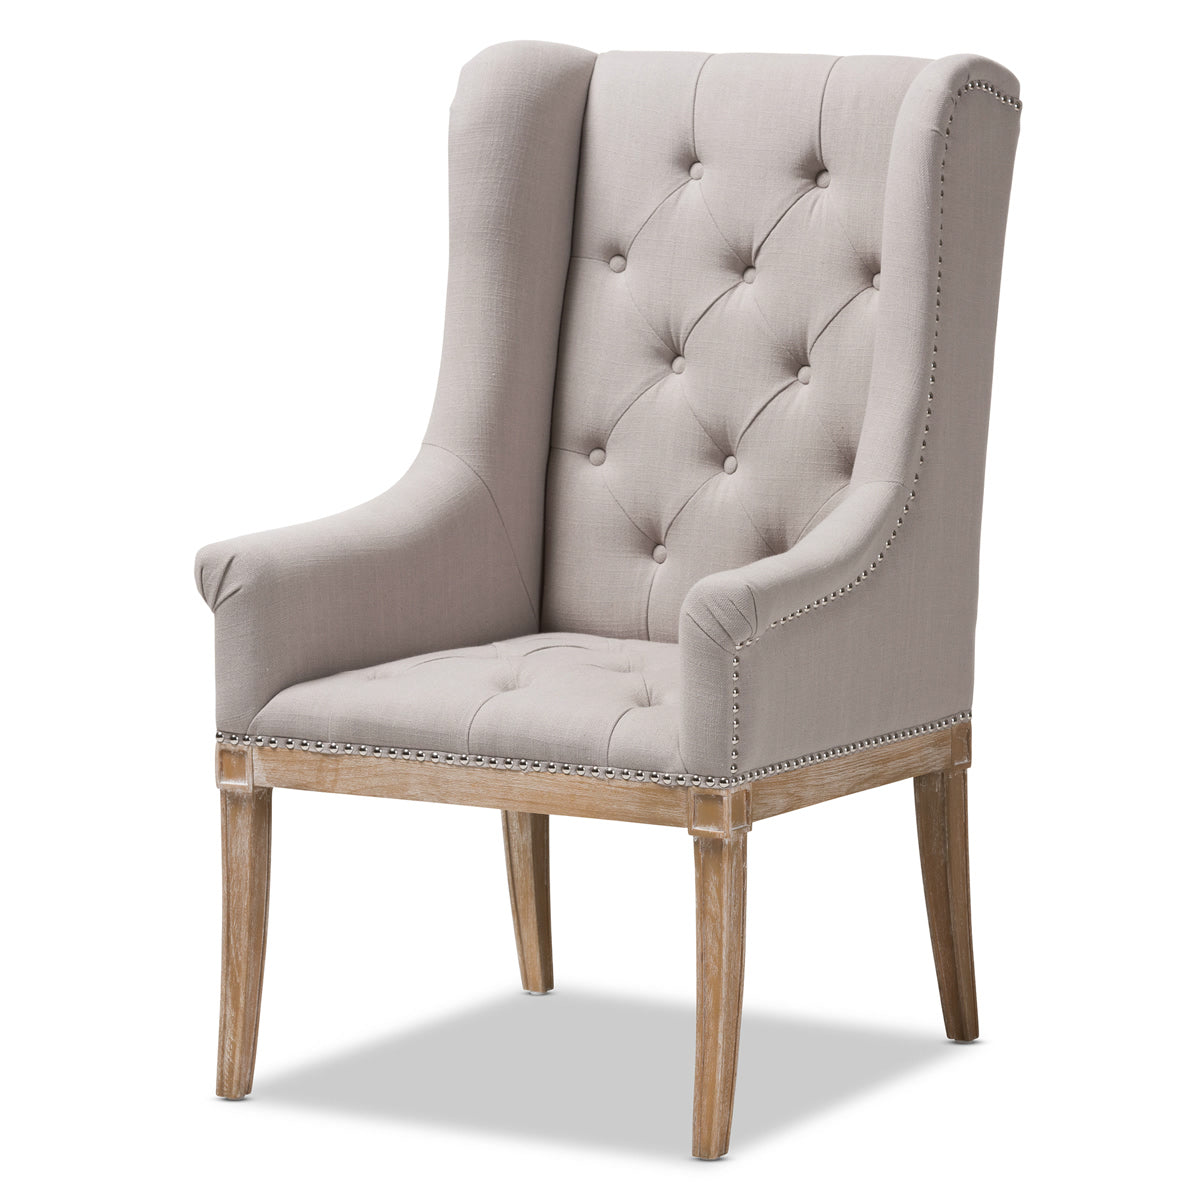 Baxton Studio Cedulie French Provincial Beige Fabric Upholstered Whitewashed Oak Lounge Chair Baxton Studio-chairs-Minimal And Modern - 1